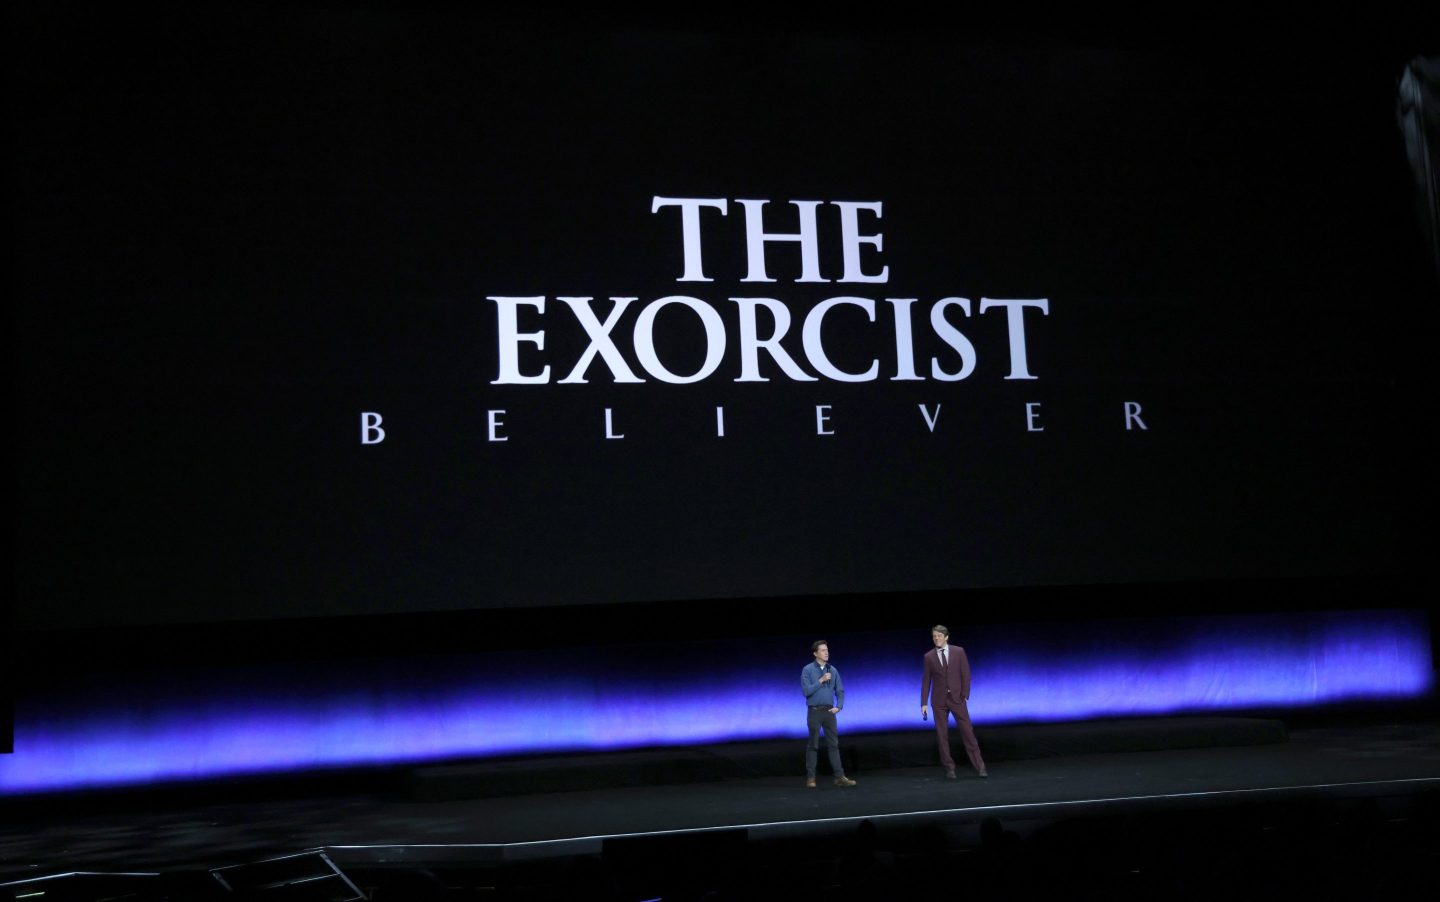 LAS VEGAS, NEVADA &#8211; APRIL 26:  David Gordon Green (L) and Jason Blum speak onstage as they promote the upcoming film &#8220;The Exorcist: Believer&#8221; during the Universal Pictures and Focus Features presentation during CinemaCon, the official convention of the National Association of Theatre Owners, at The Colosseum at Caesars Palace on April 26, 2023 in Las Vegas, Nevada. (Photo by Gabe Ginsberg/WireImage)